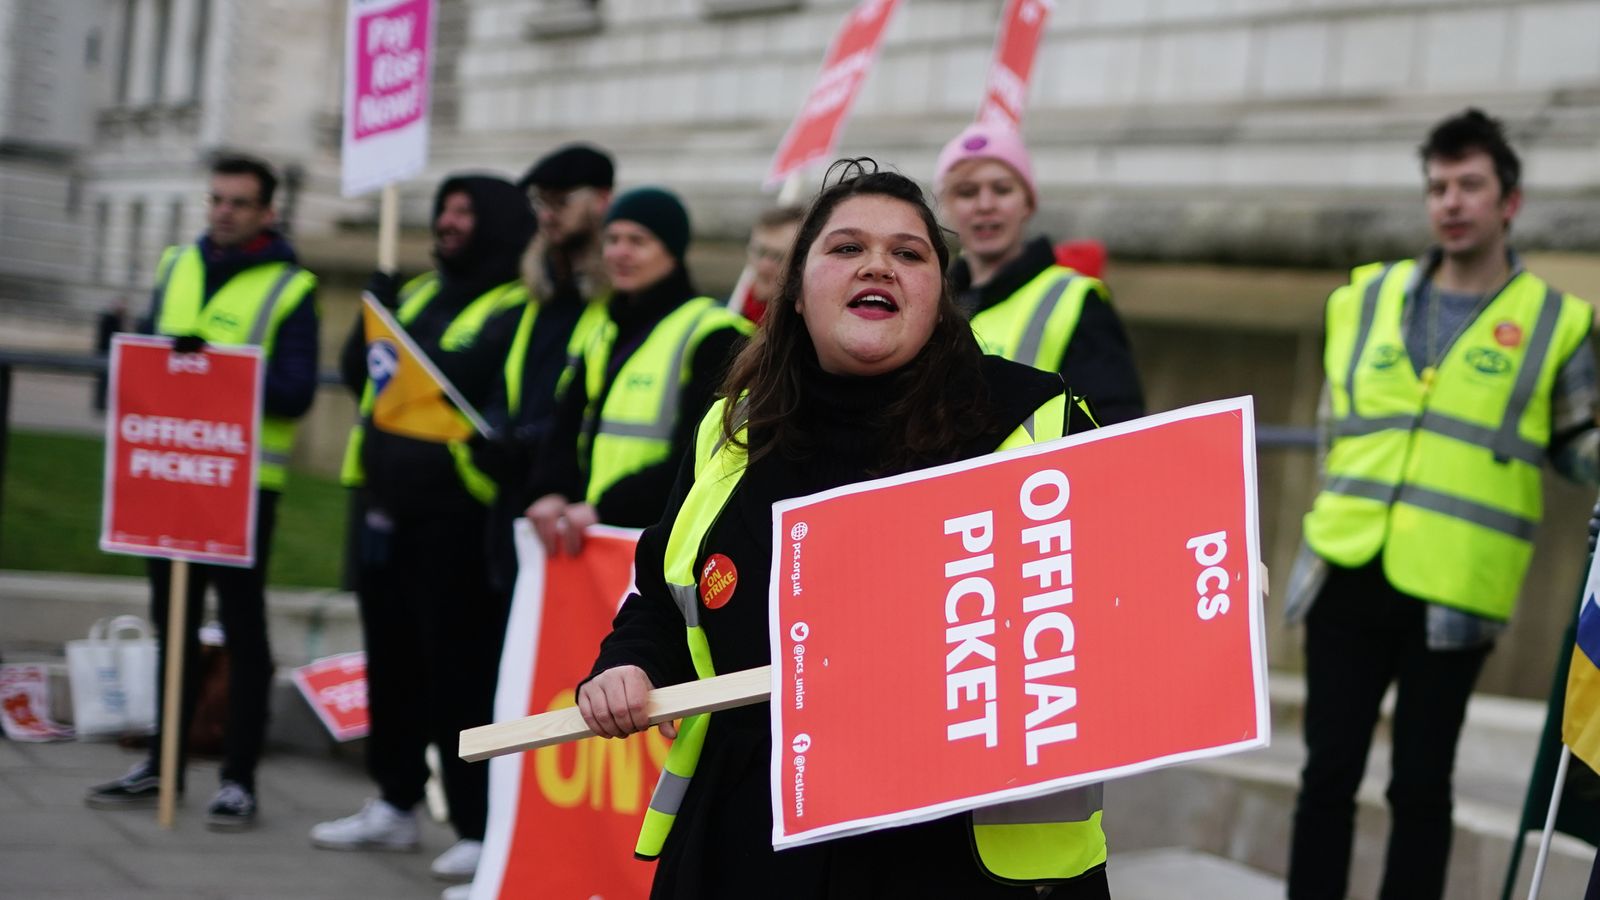 Civil servants threaten further strikes after government's 'insulting' pay offer